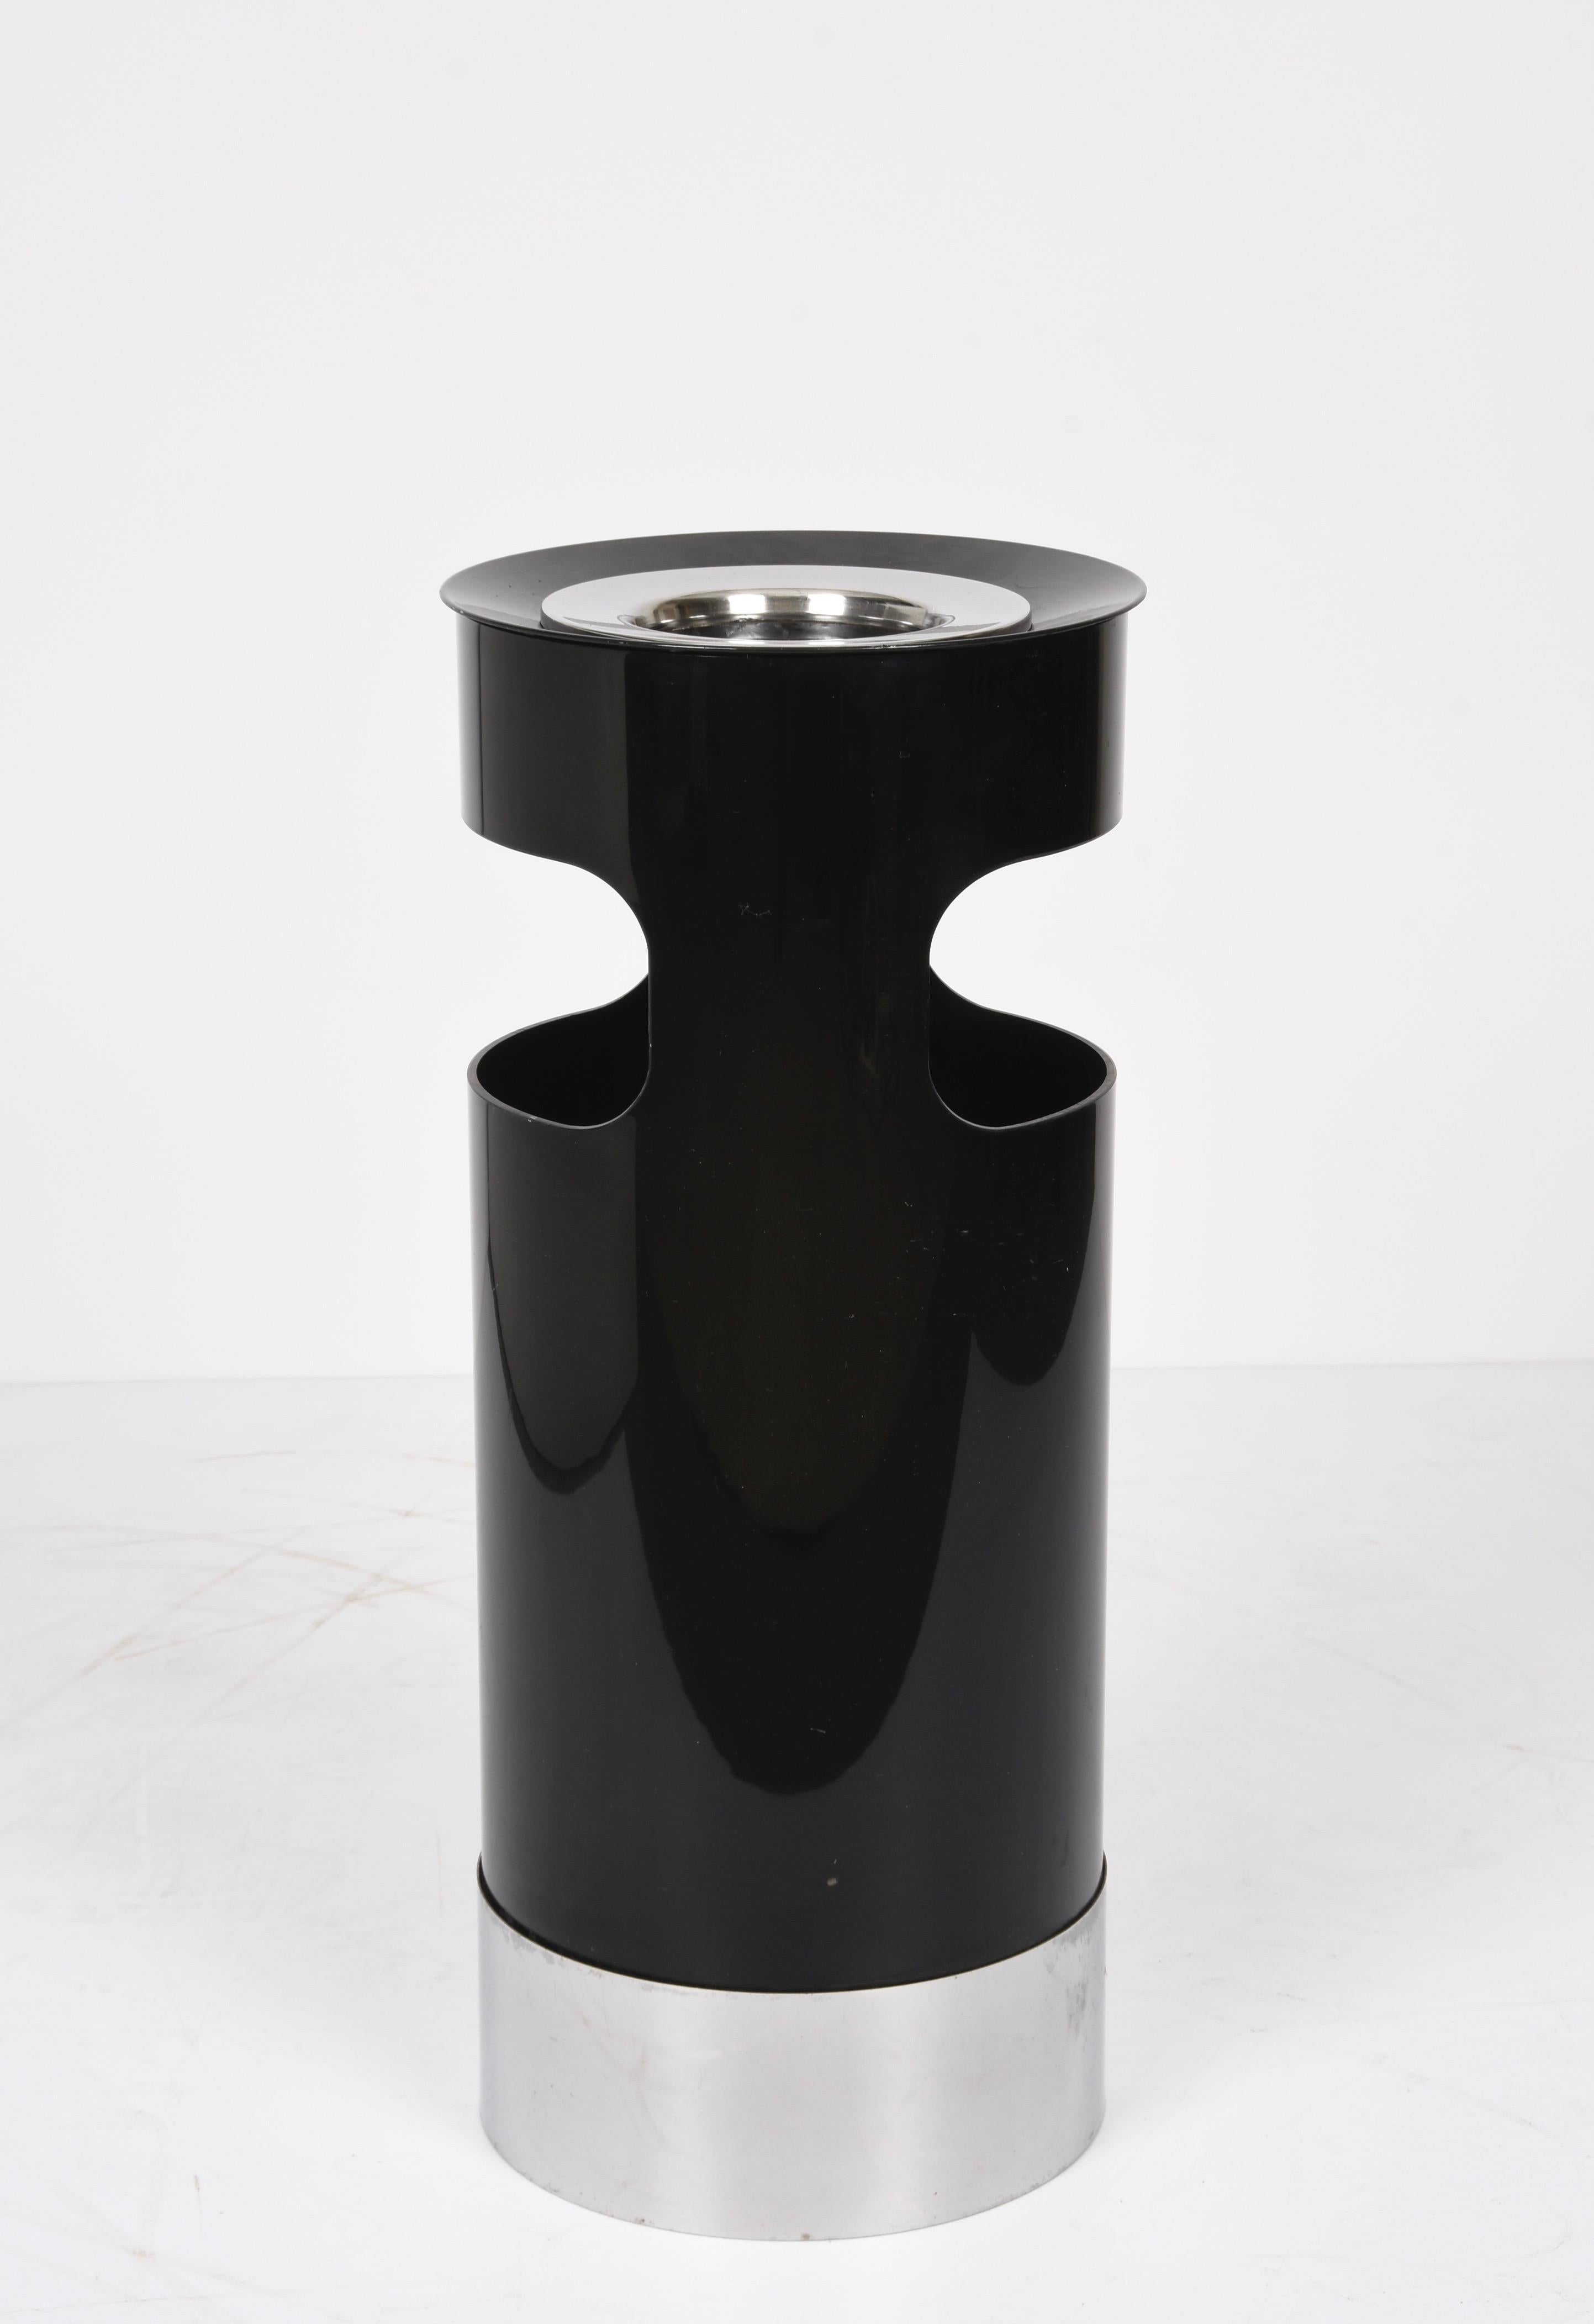 Gino Colombini Midcentury Black Umbrella Stands or Ashtray for Kartell, 1970 For Sale 6